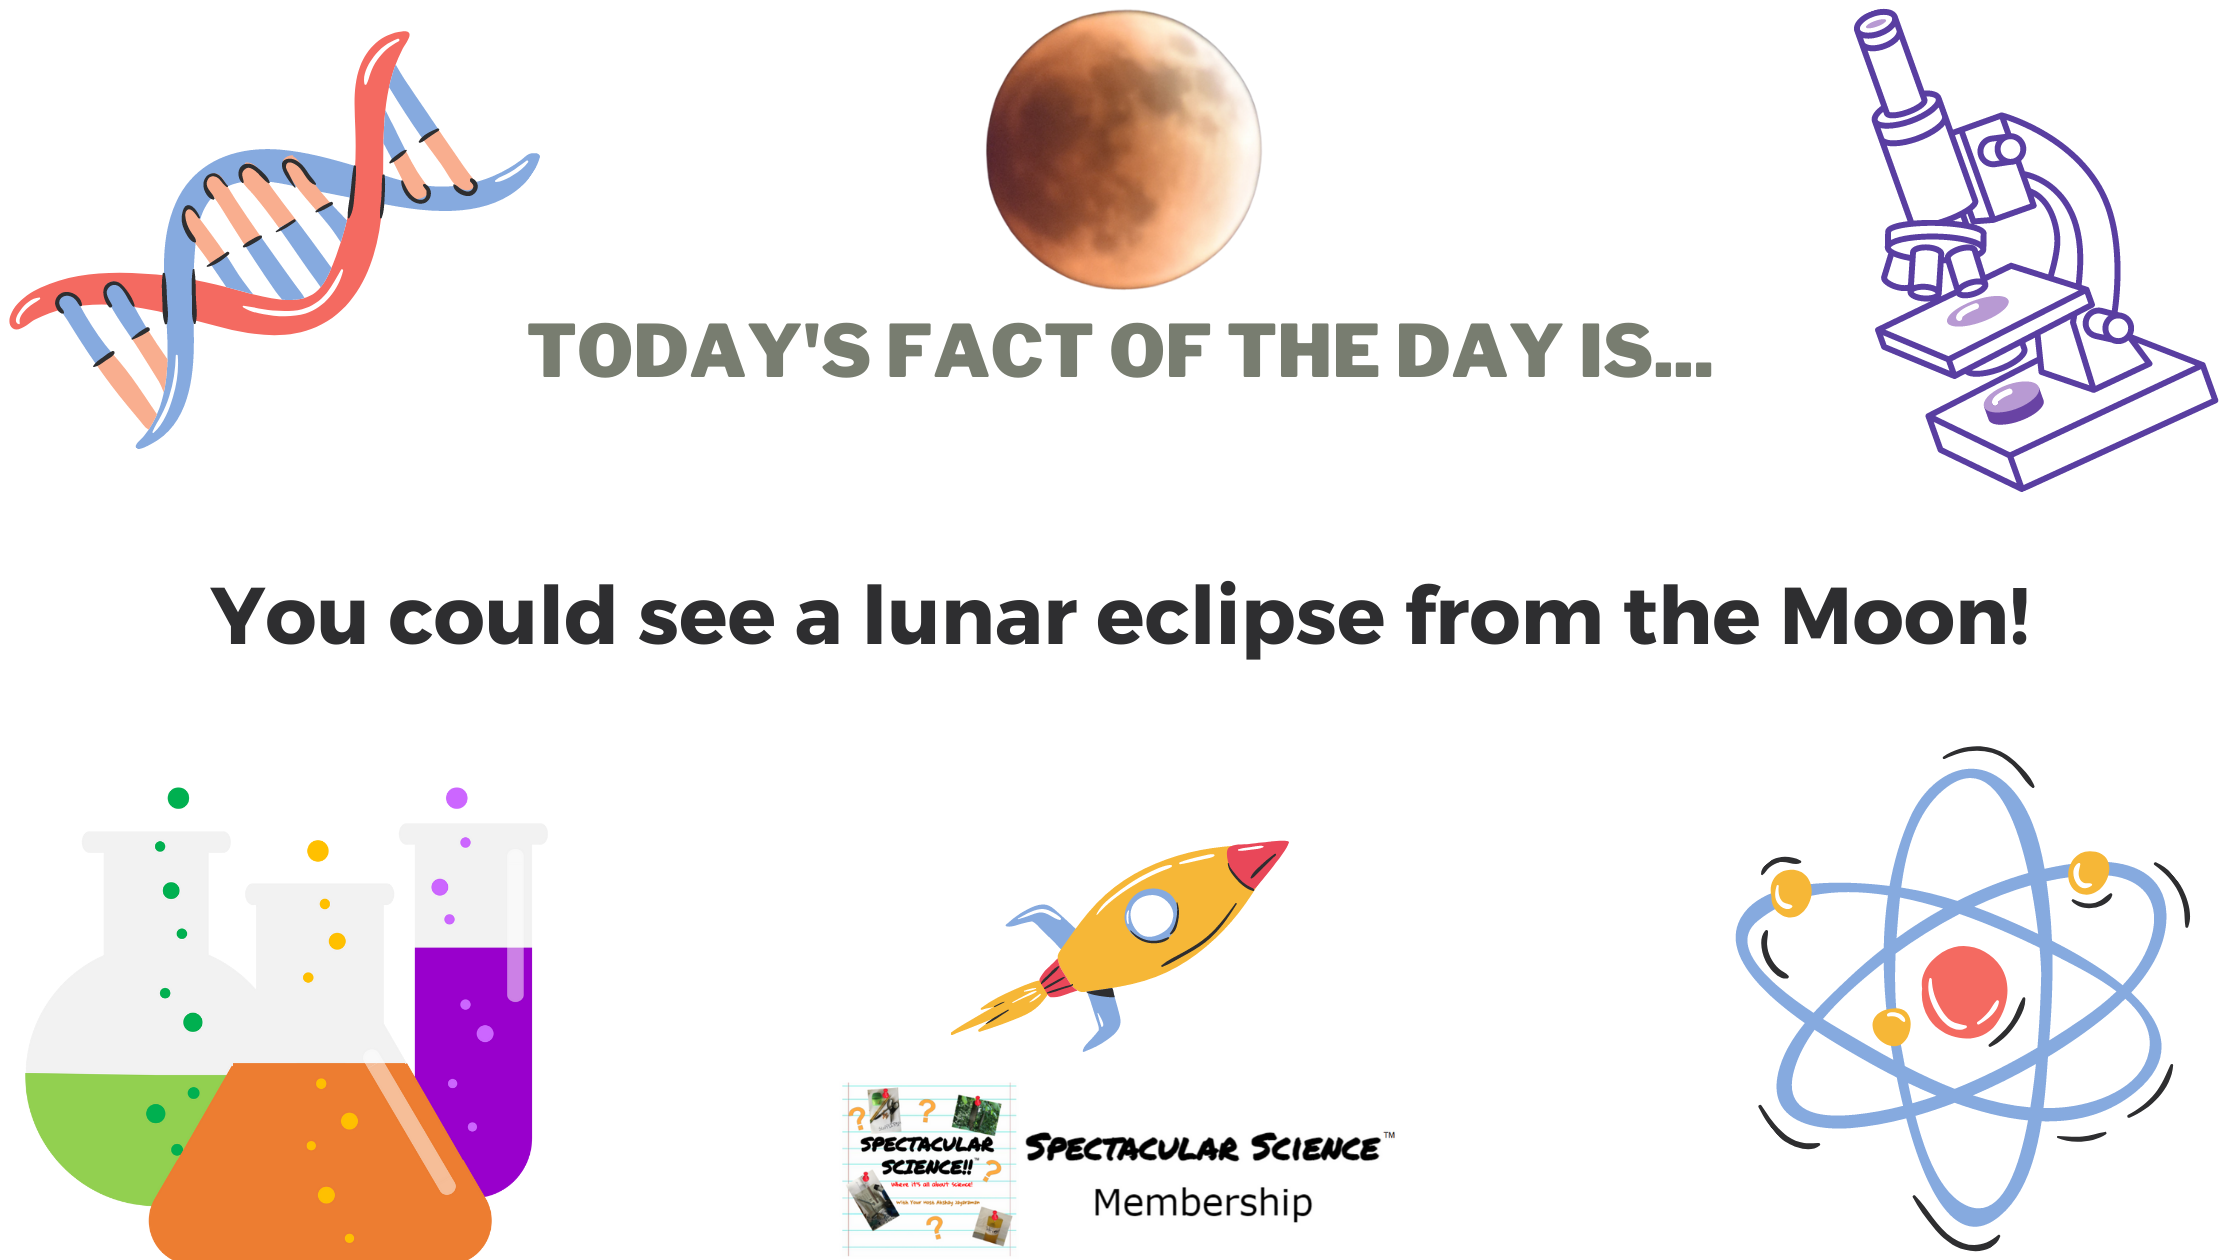 Fact of the Day Image May 17th